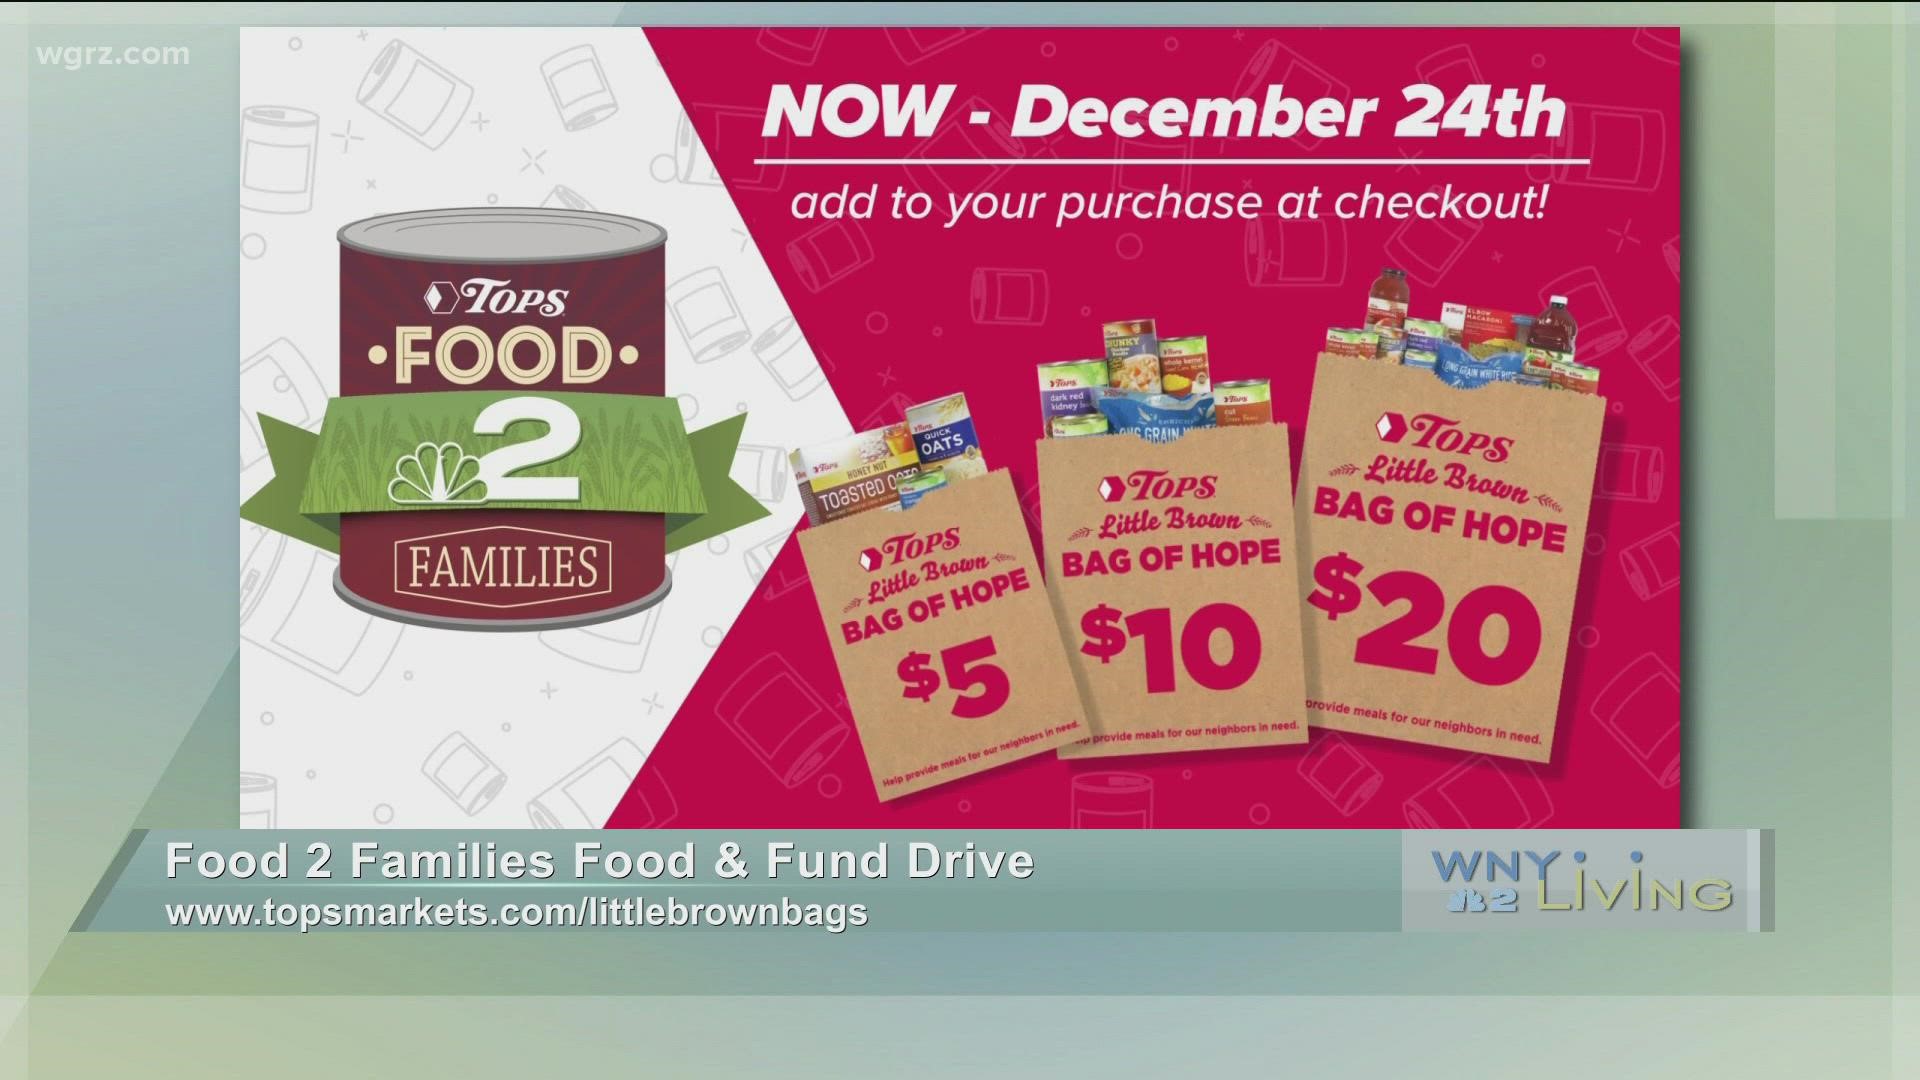 WNY Living - November 27 - Food 2 Families (THIS VIDEO IS SPONSORED BY TOPS FRIENDLY MARKETS)